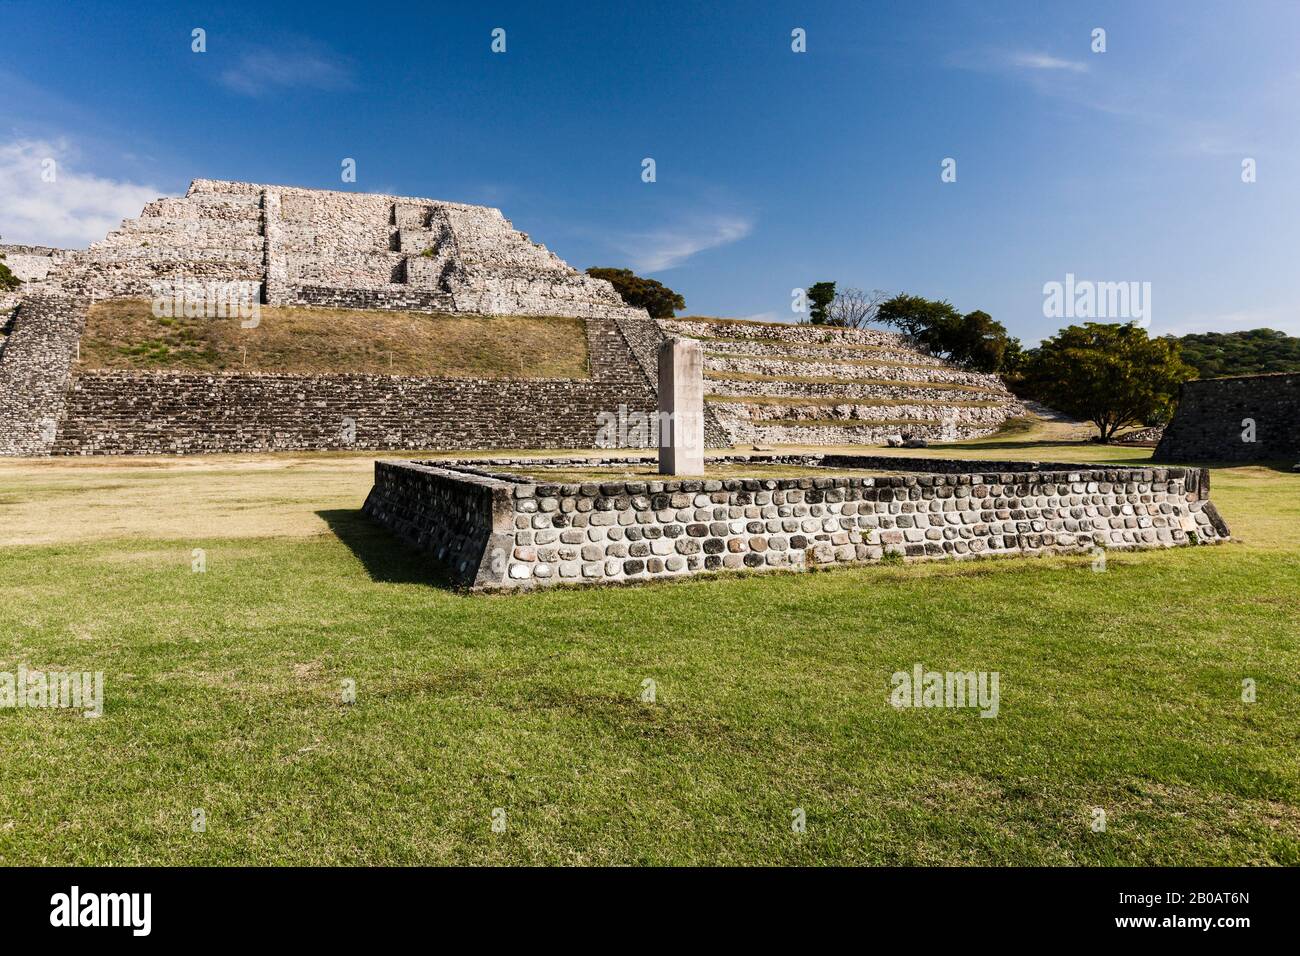 Grand Plaza of Xochicalco archaeological site, Mayan Ruins, Morelos ...